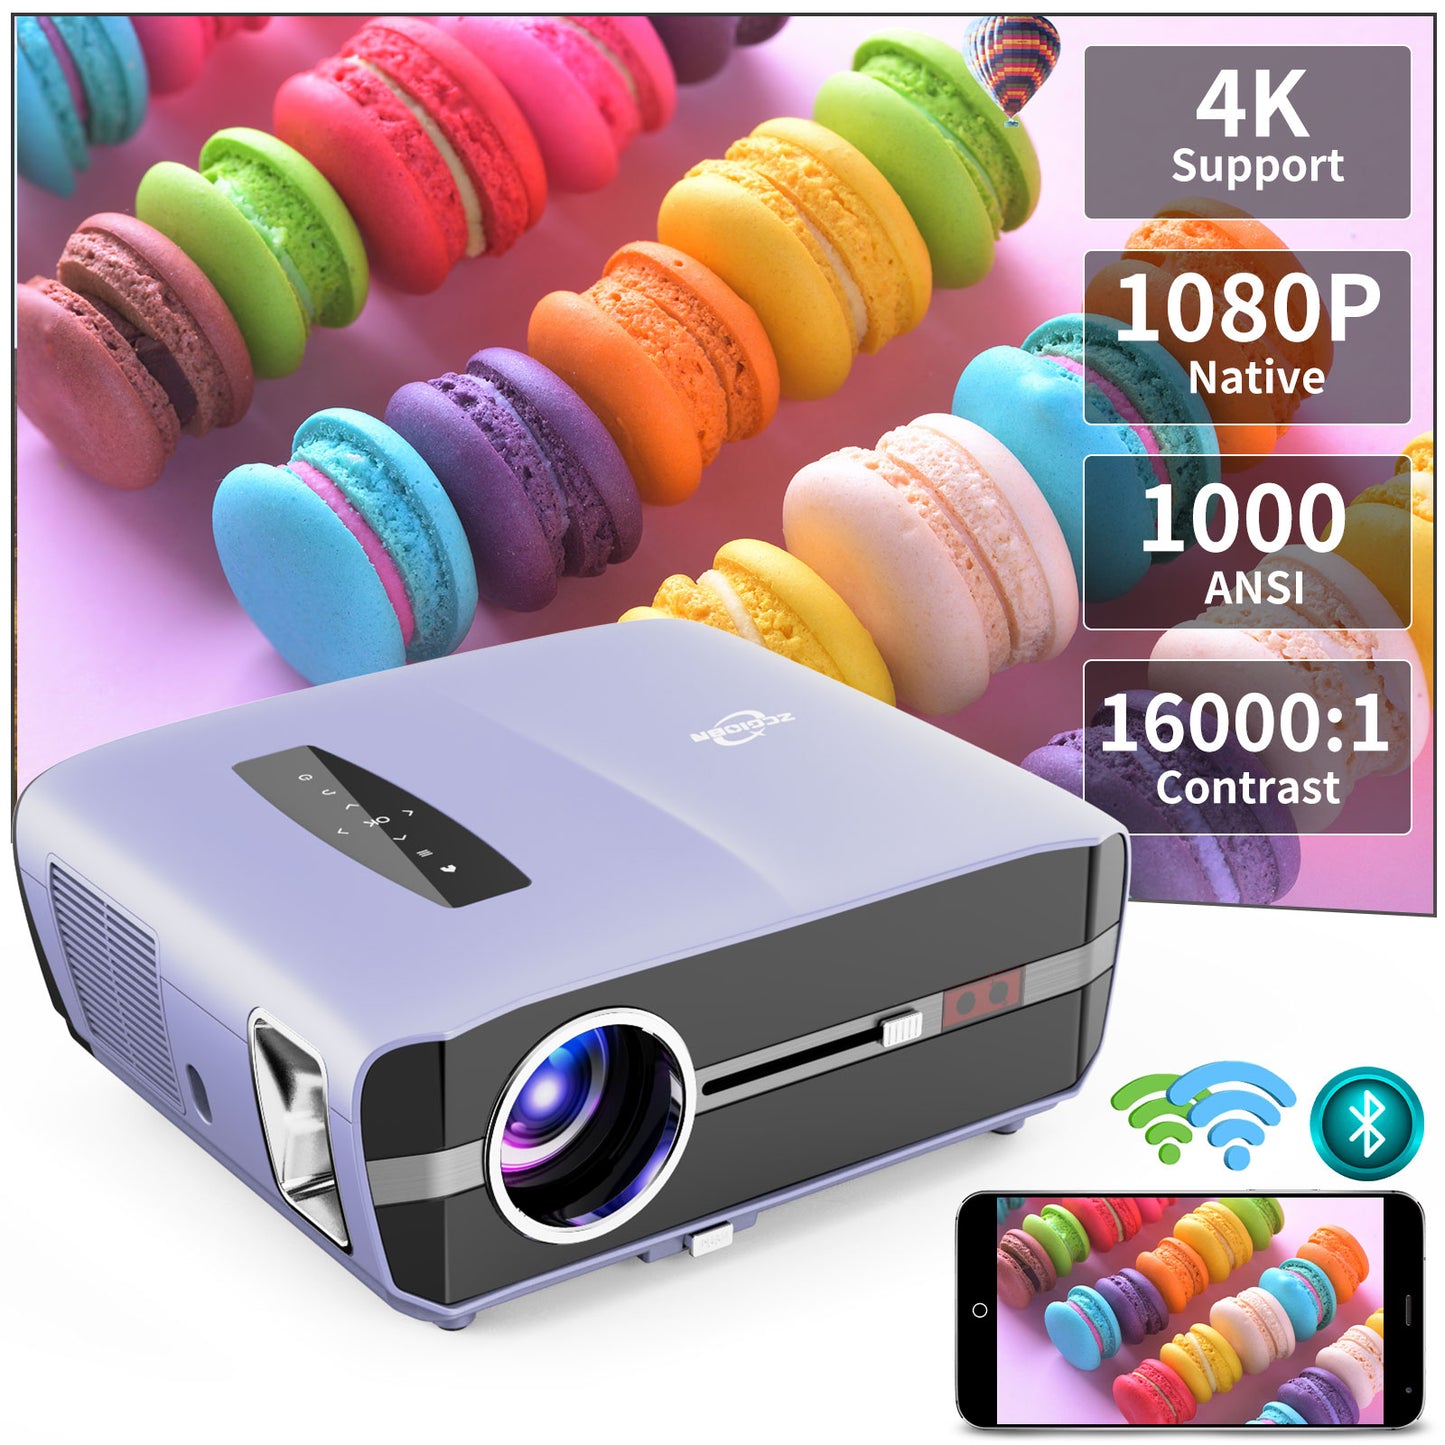 4K WiFi Video Projector,13000LM Smart Projector LED Native 1080P Full HD,5G Wireless Android Projector Airplay Netflix YouTube Compatible,Home Cinema Outdoor Projector with Zoom Speaker HDMI USB RJ45